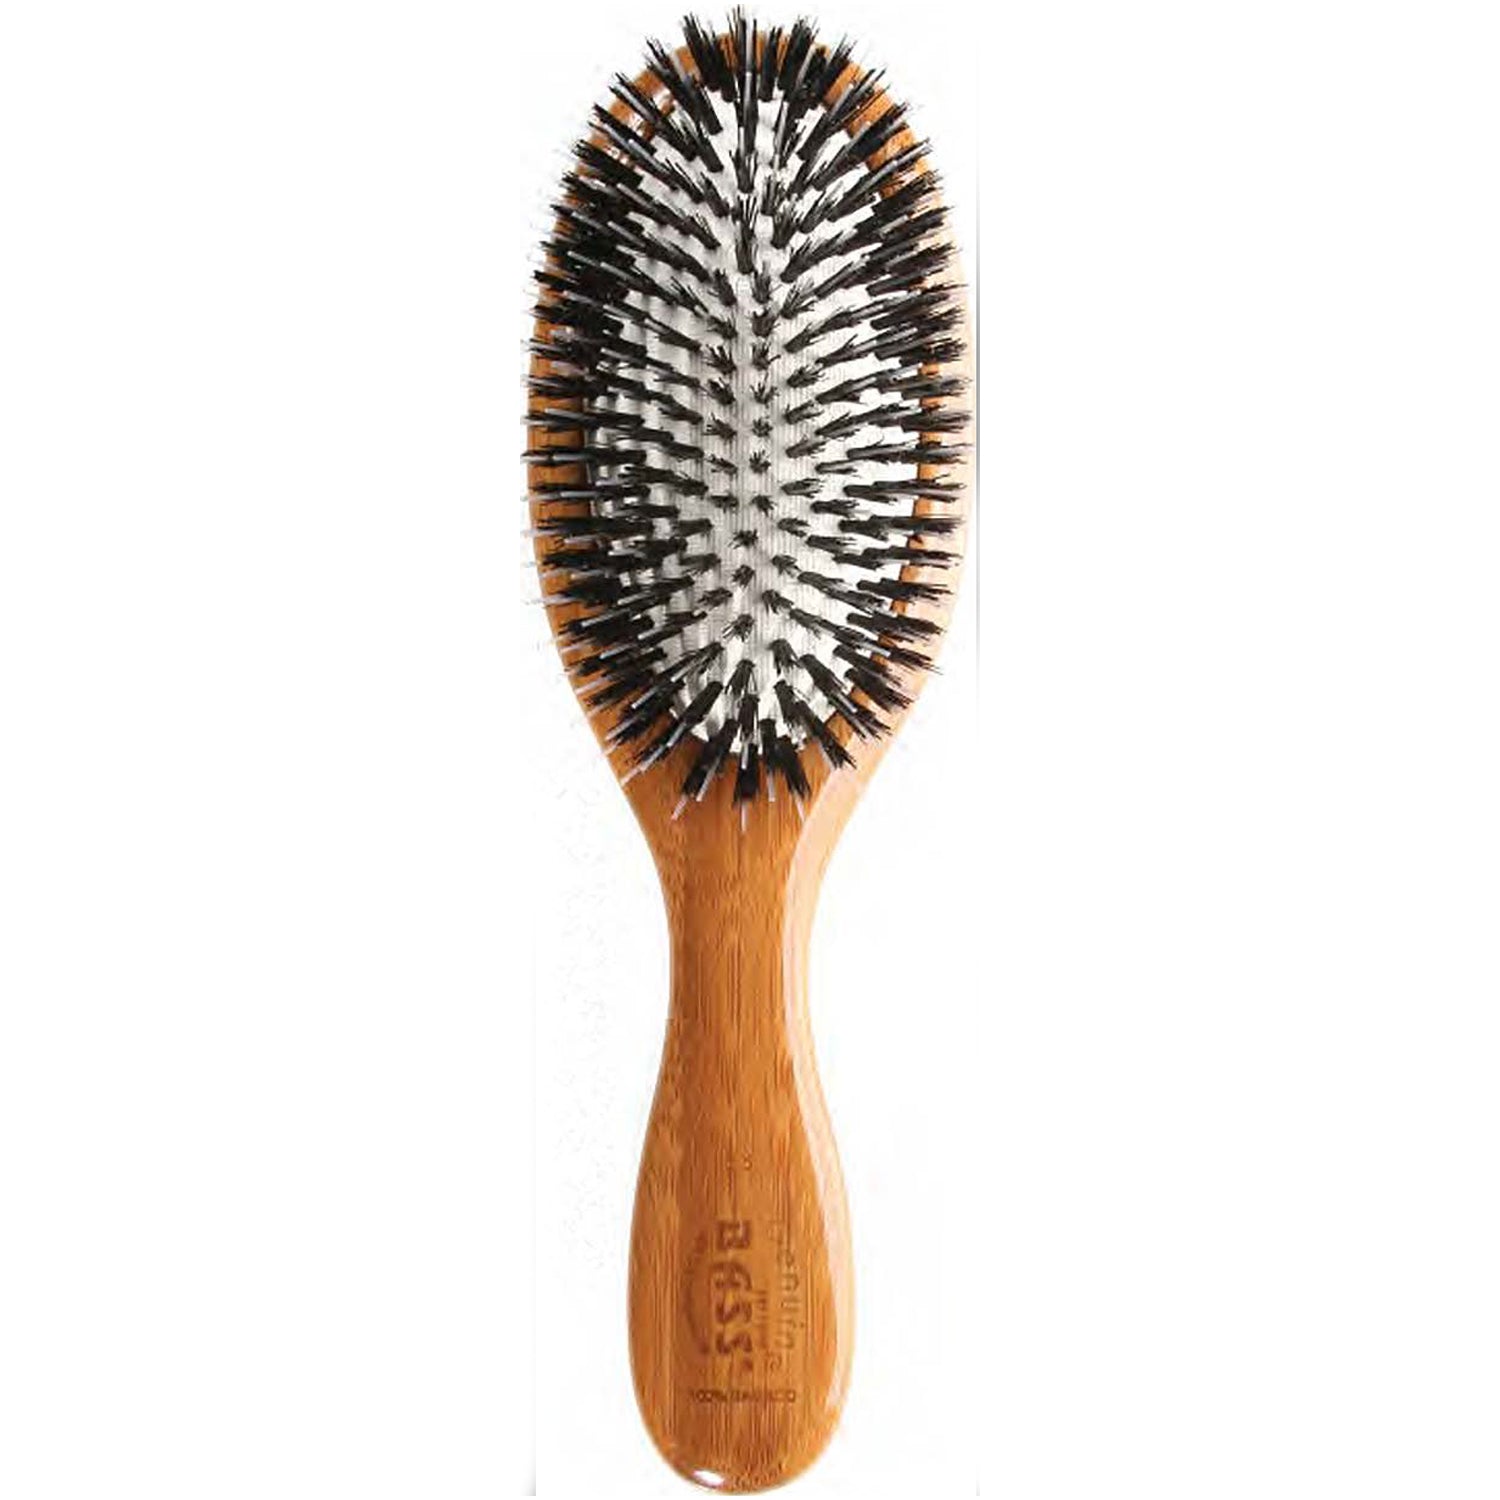 Bass Brushes Shine & Condition Boars Hair & Nylon Pin Brush For Dogs, 53P